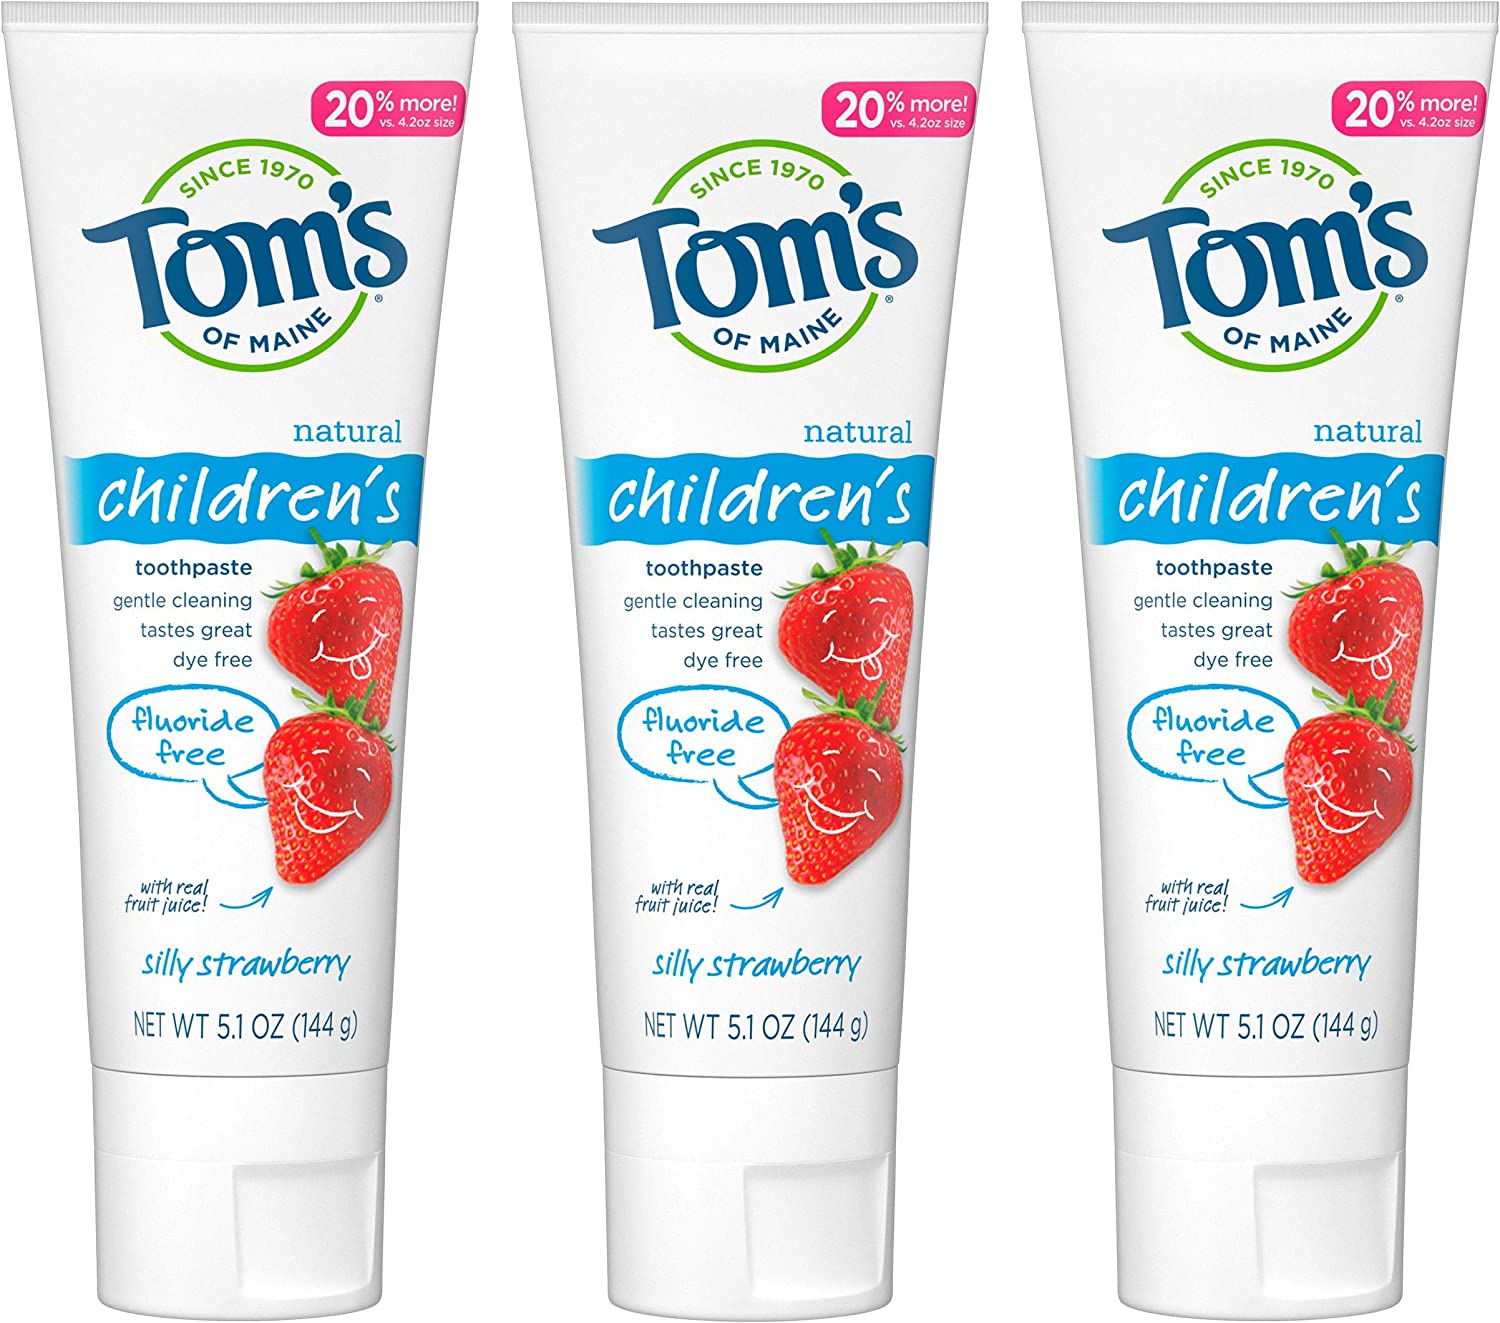 Tom’s Of Maine Fluoride Free Children’s Toothpaste, Natural Toothpaste, Dye Free, No Artificial Preservatives, Silly Strawberry, 5.1 oz. 3-Pack (Packaging May Vary)